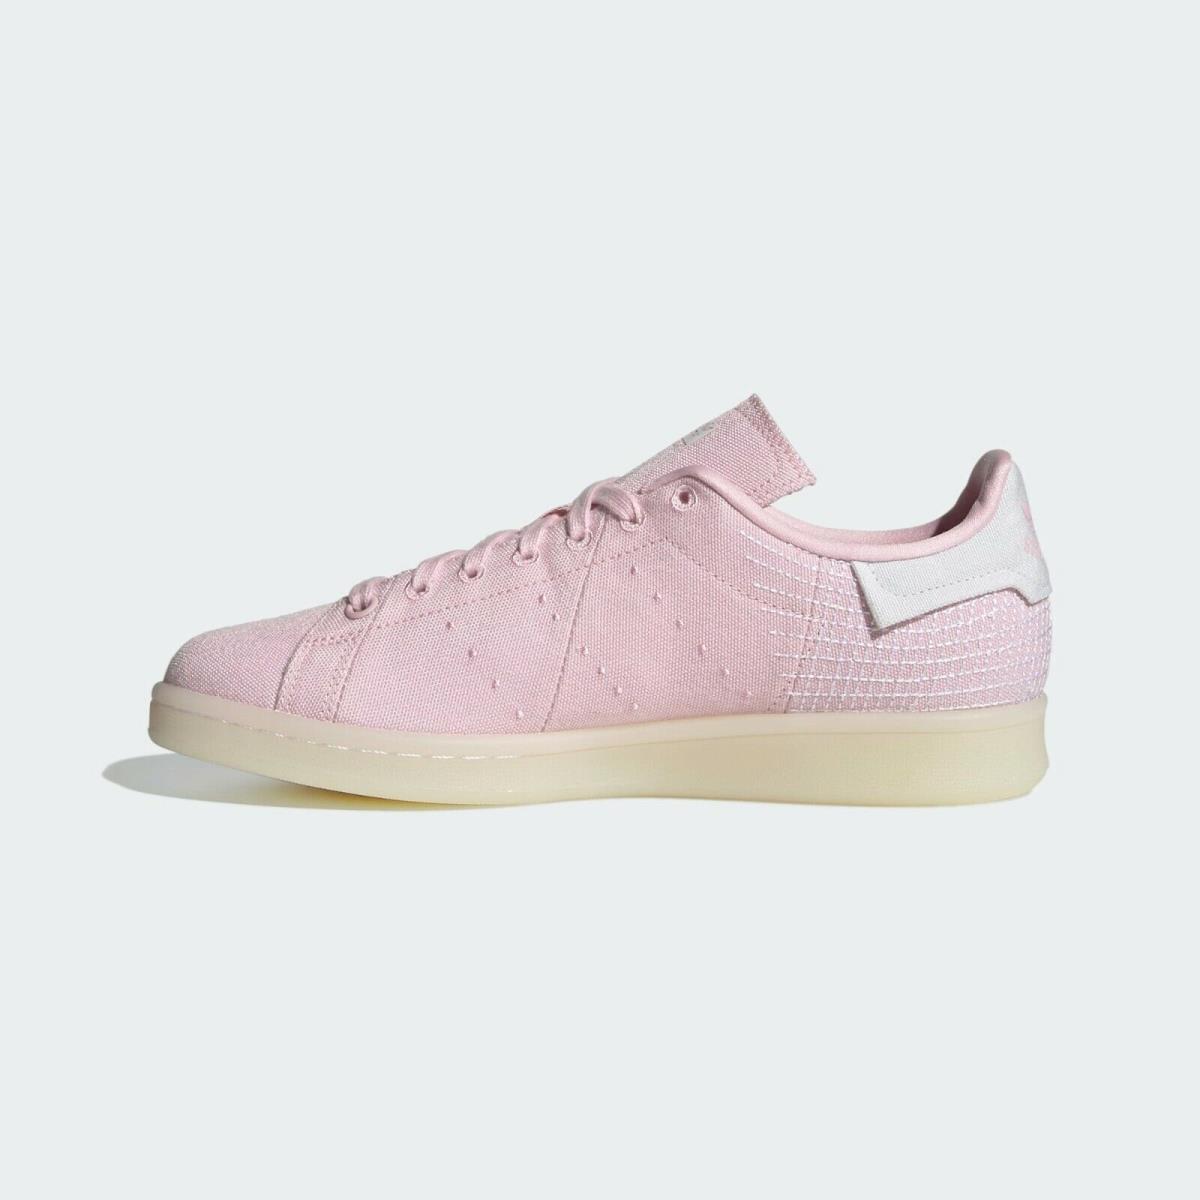 Adidas shoes STAN SMITH PRIMEBLUE - Clear Pink / Cloud White / Core Black 5